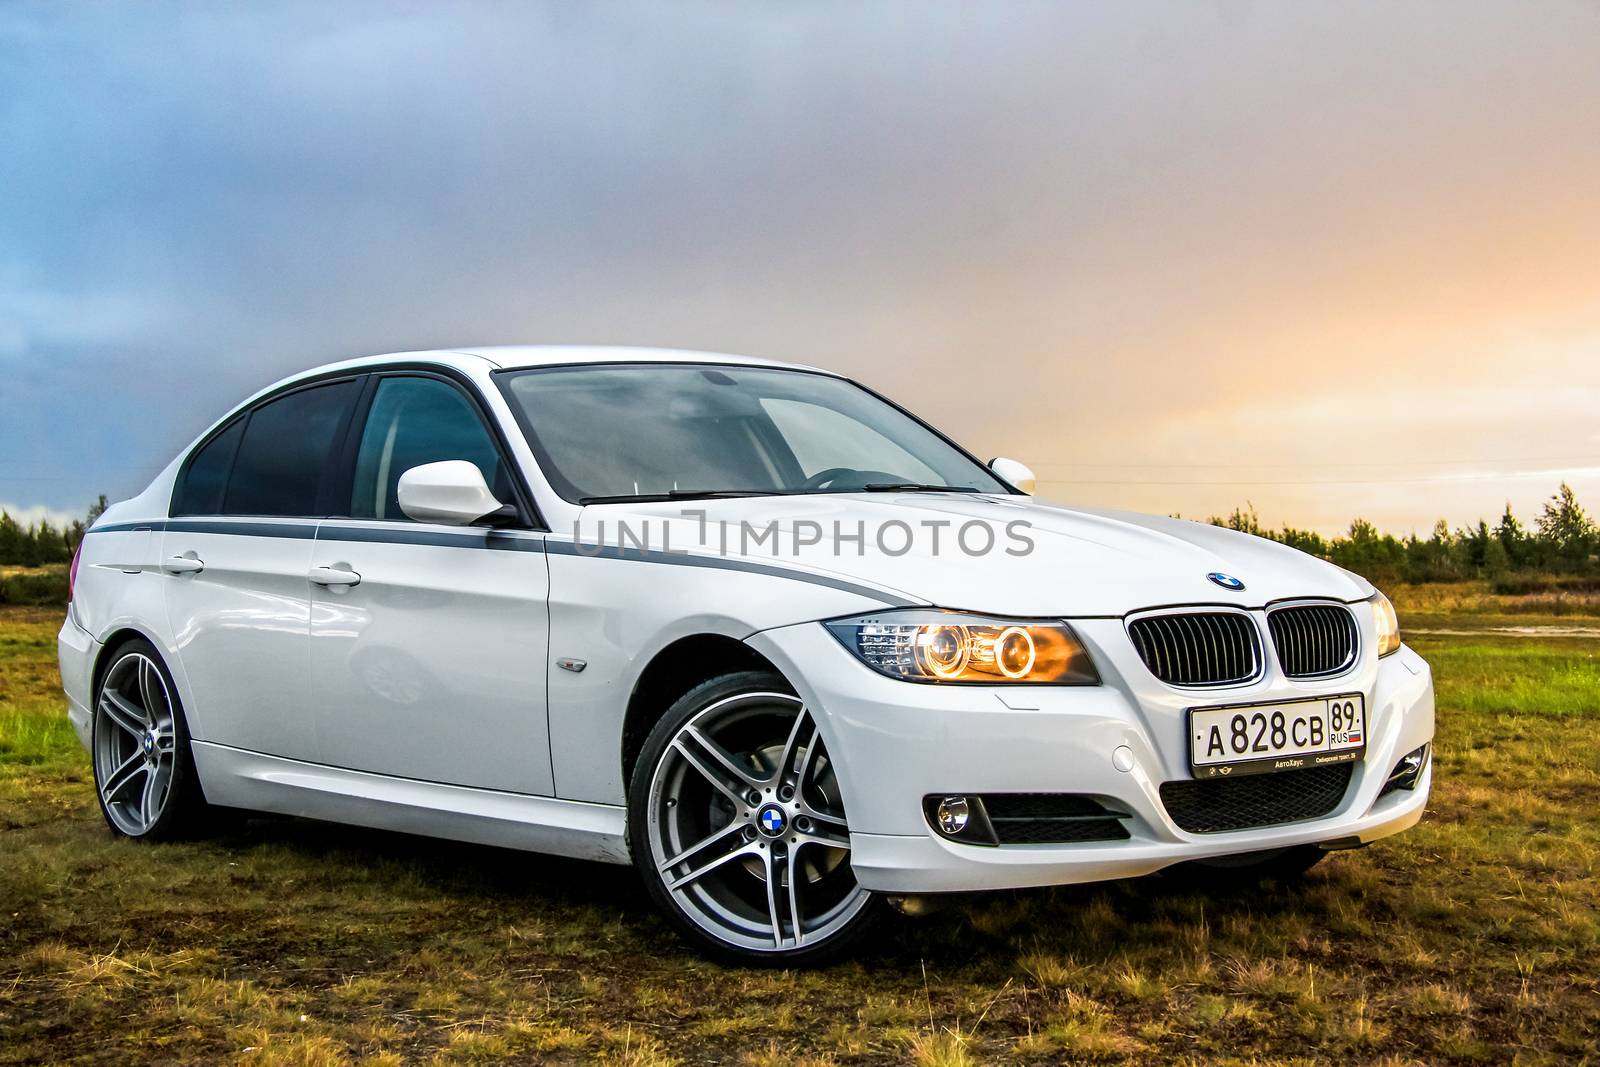 NOVYY URENGOY, RUSSIA - AUGUST 21, 2015: Motor car BMW E90 318i at the countryside.